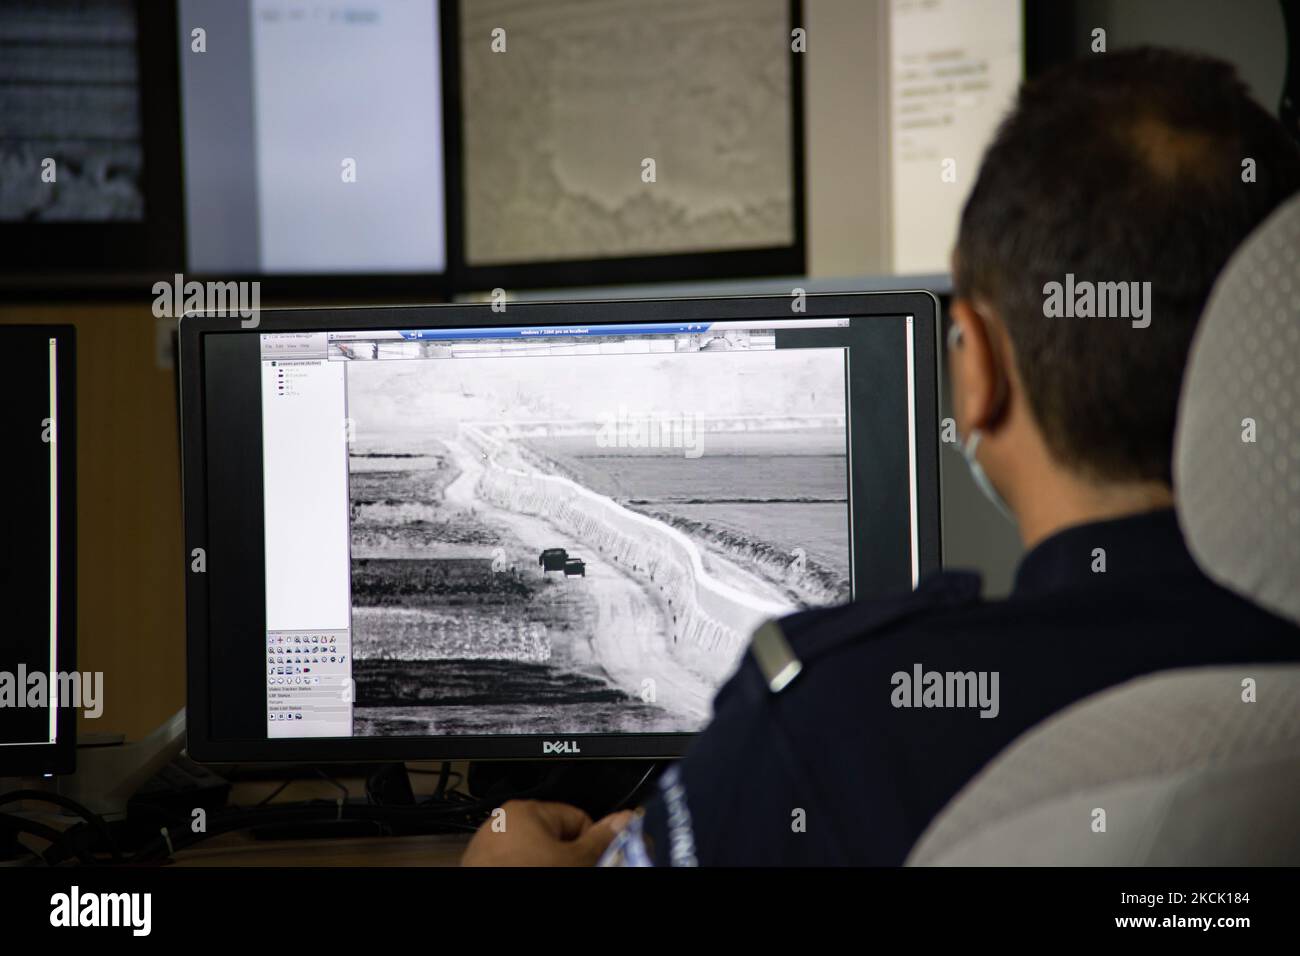 The control room of the new camera systems in Nea Vyssa. Greece strengthens its surveillance capabilities to fight the increased refugee and migrants flows from Turkey. The border protection at Greek Turkish borders in Evros region is reinforced, supported by the EU, with more Frontex personnel and vehicles, more Greek border police officers, drones, building a new fence and wall, watchtowers with thermal remote cameras and radar on the tower, new combat vehicles and control rooms. On 20 August 2021 Greek ministers visited Evros to inspect the process of the steel fence works and the border su Stock Photo